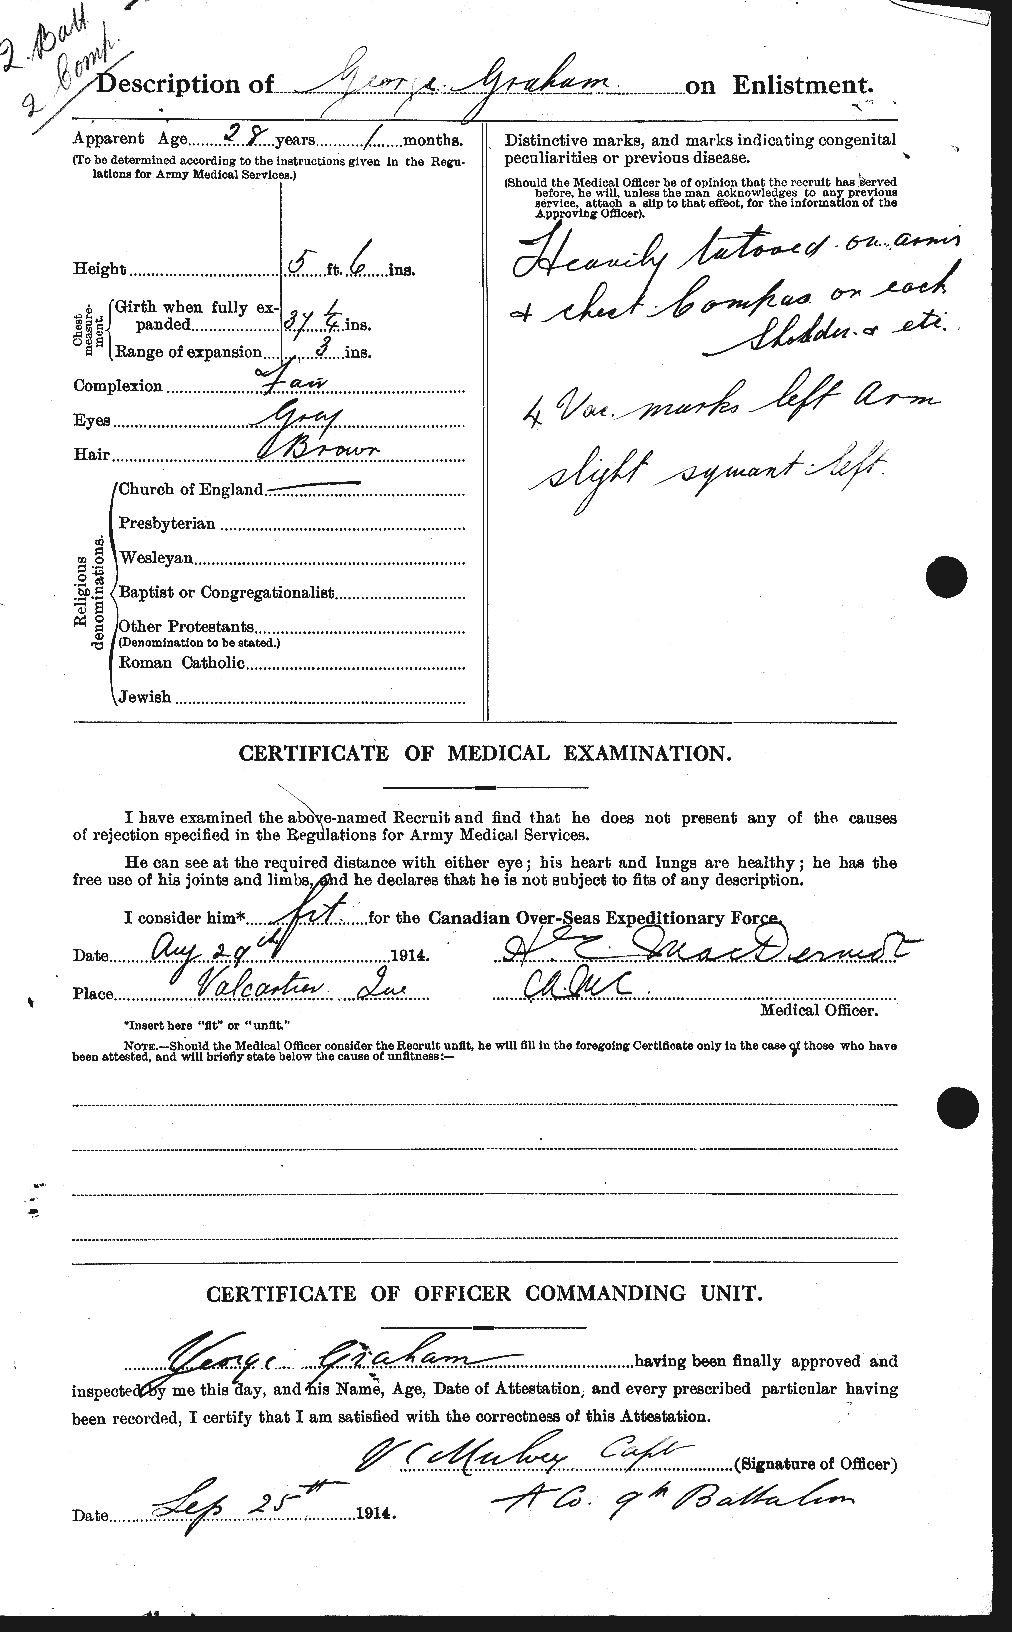 Personnel Records of the First World War - CEF 357632b